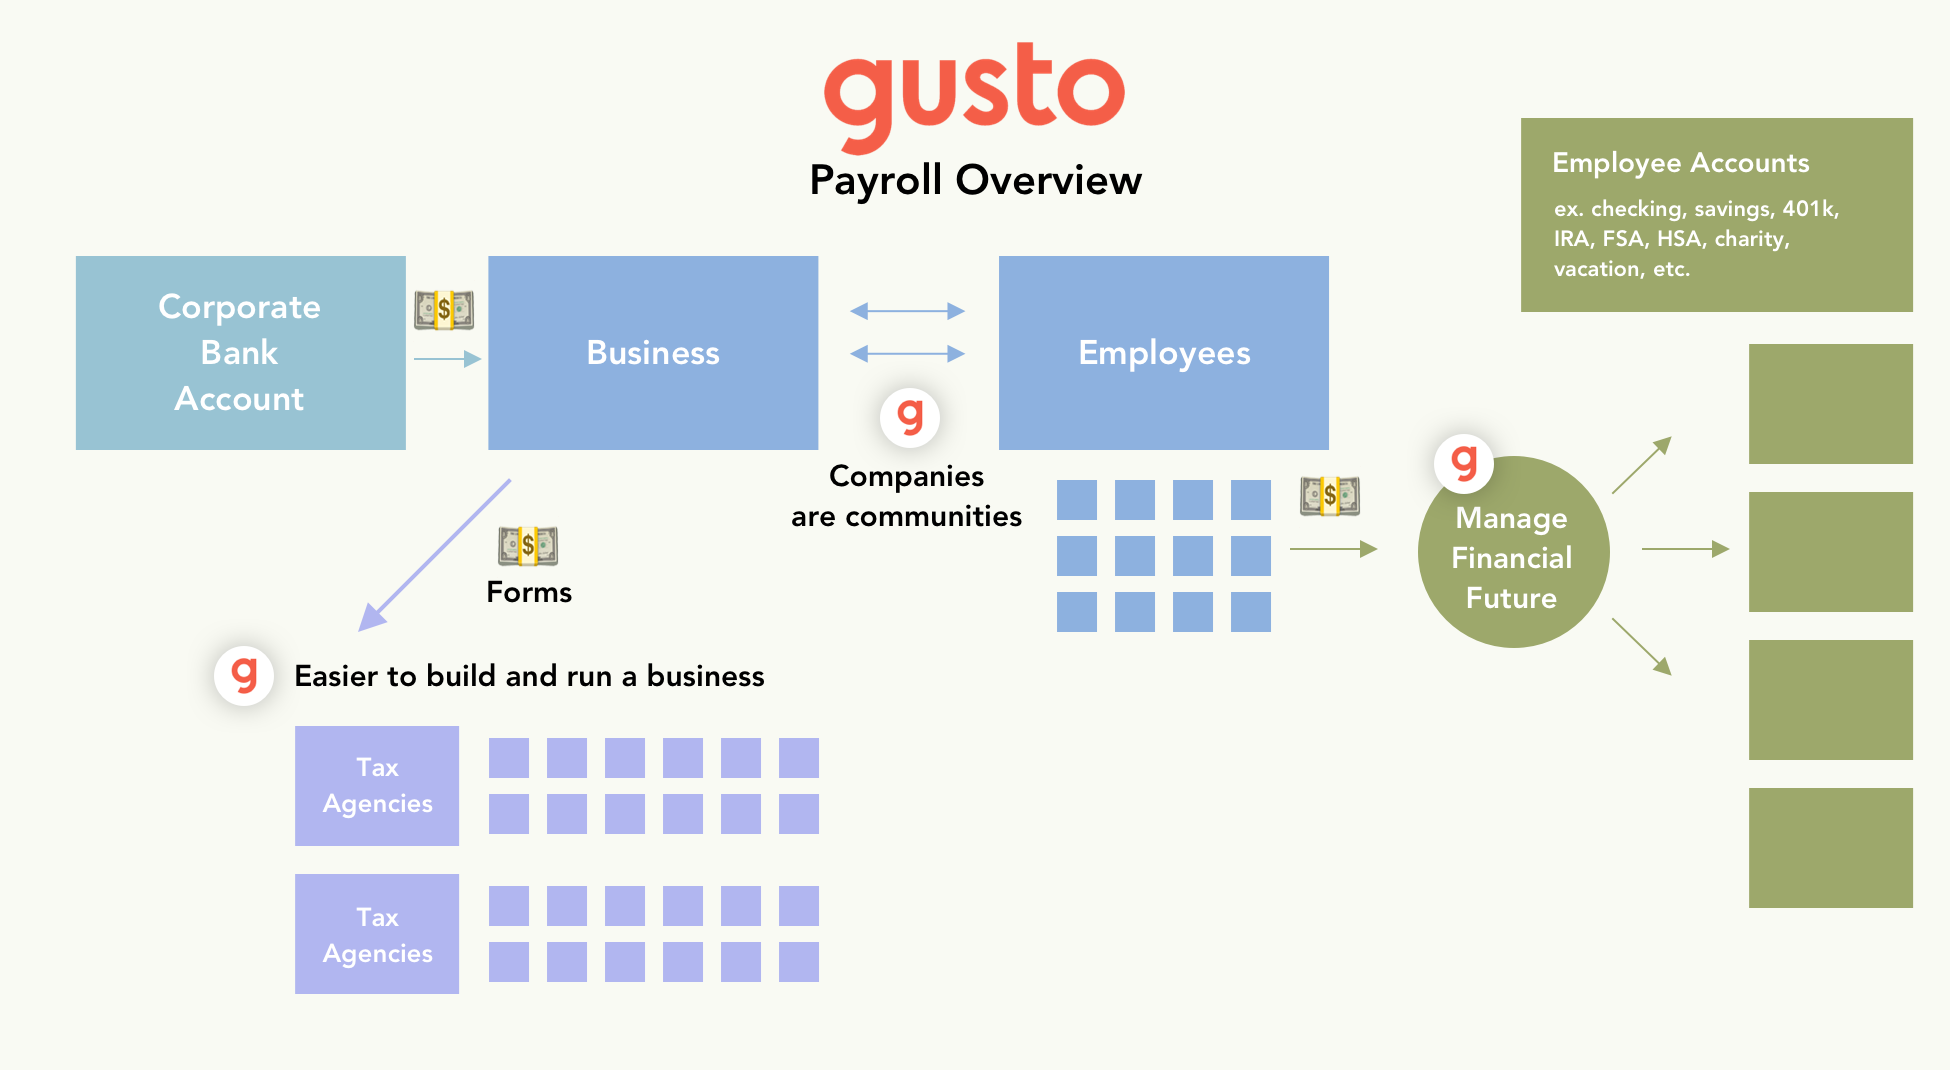 Gusto Payroll Overview